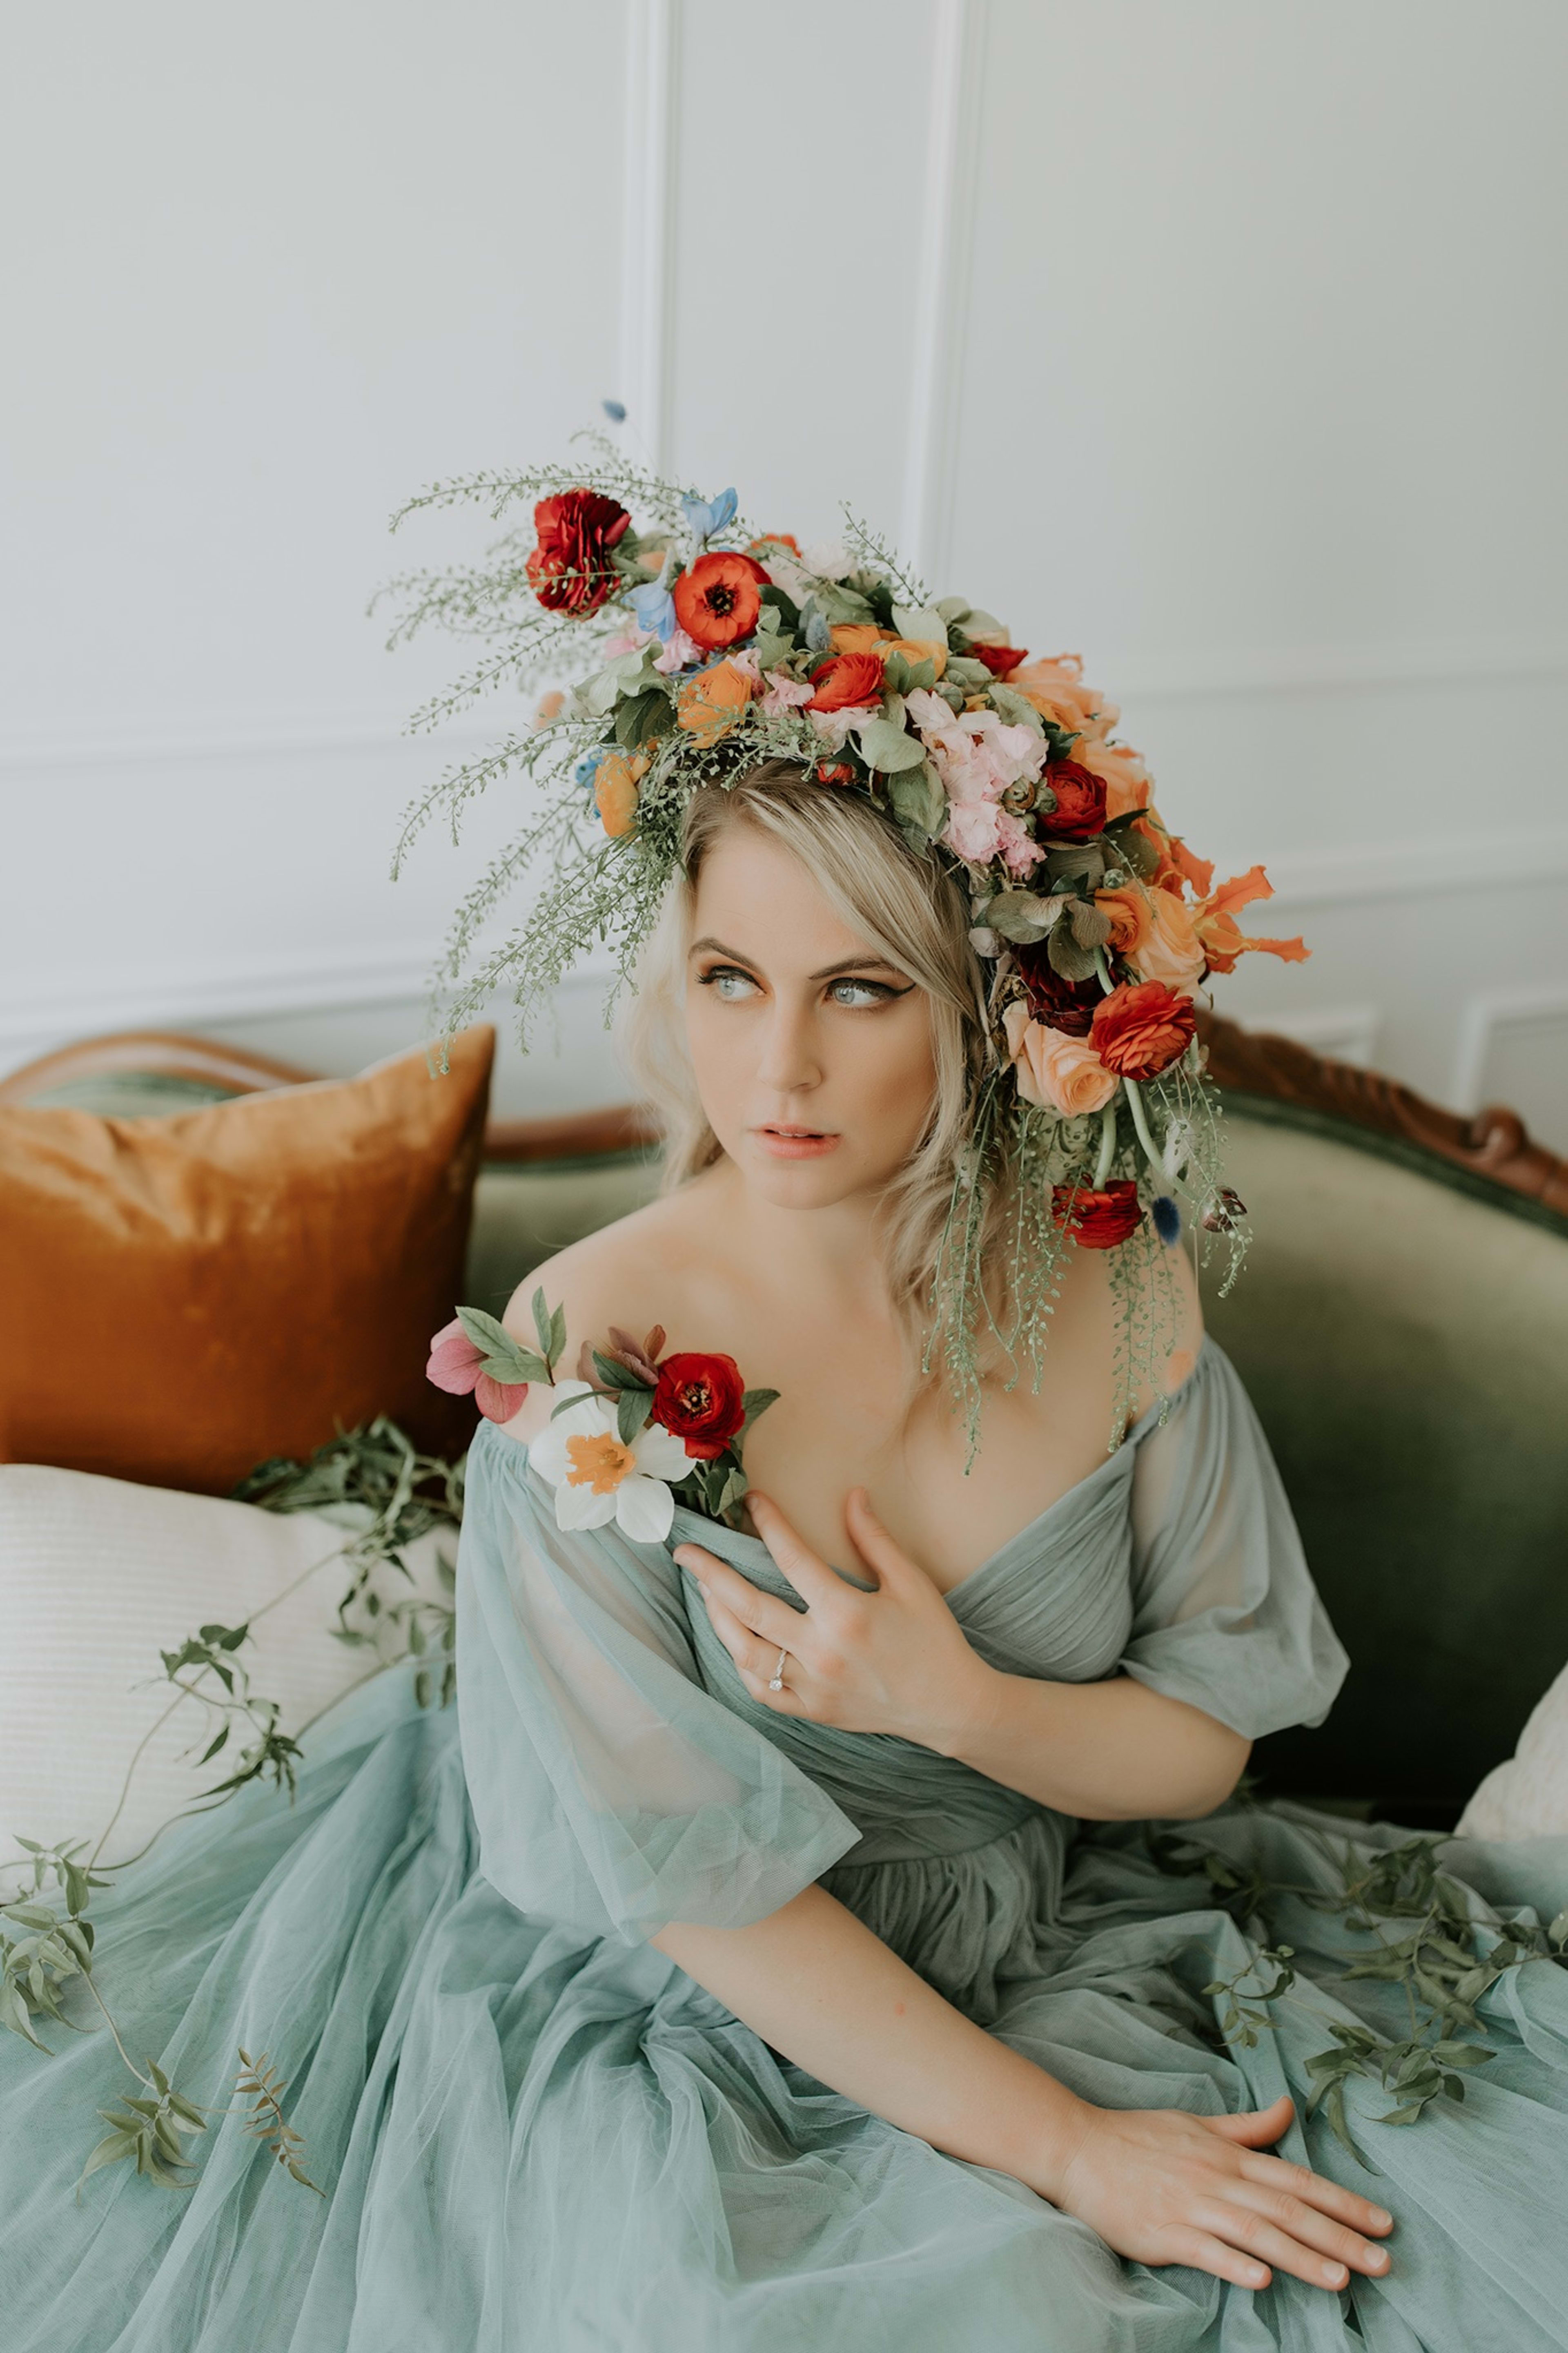 A Victorian-themed photoshoot featuring a woman wearing a flower crown sitting on a green and white couch.